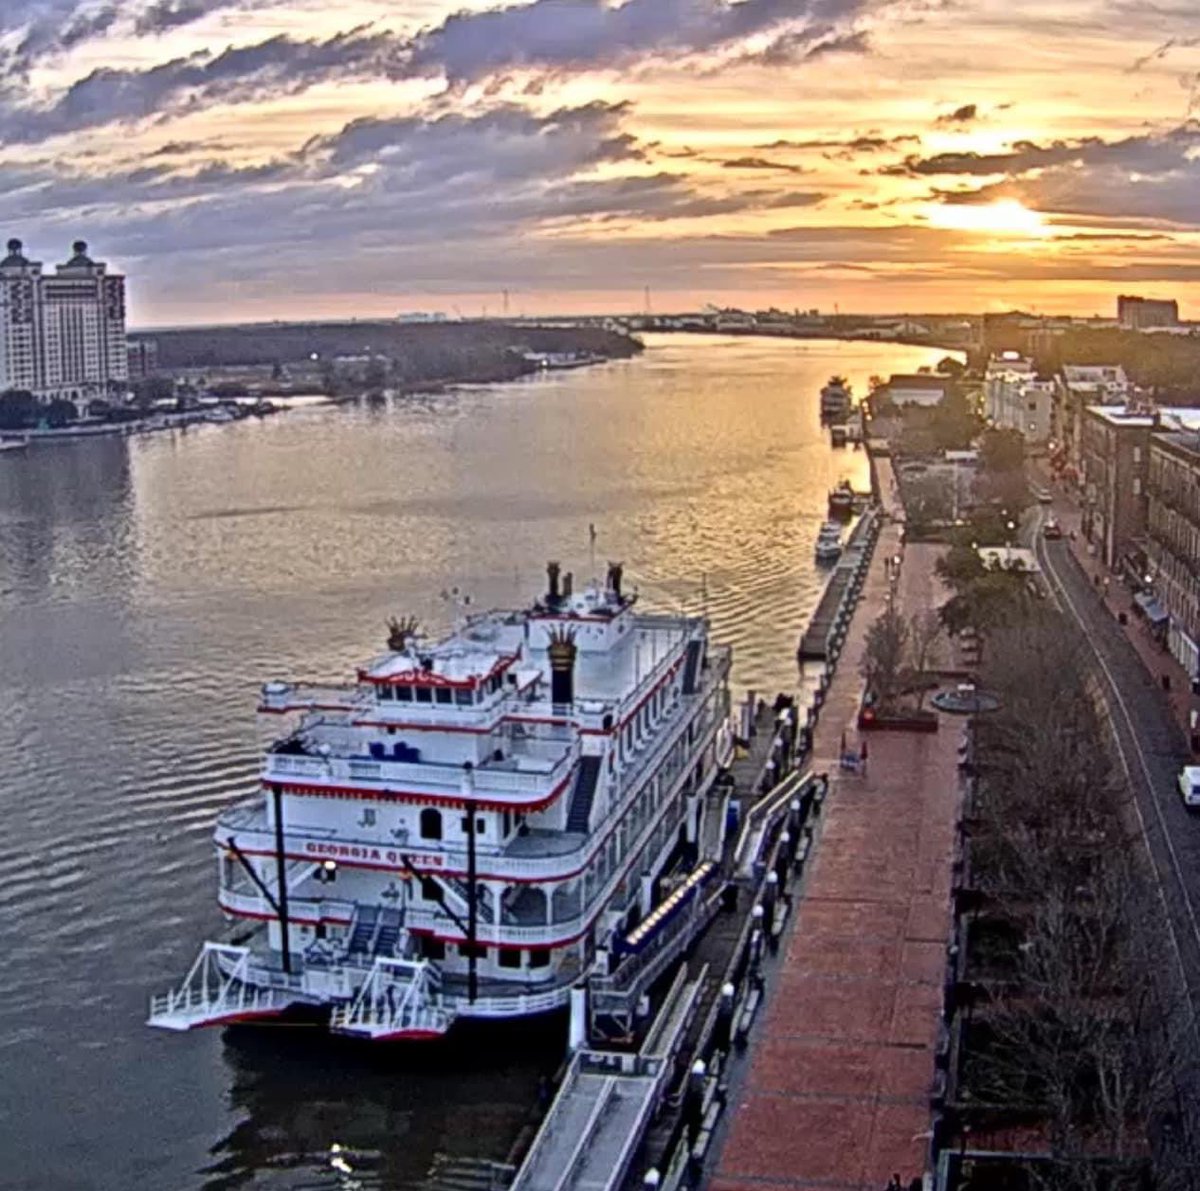 Welcome home!
After over a month in dry dock, The Georgia Queen passed all her inspections and is back on the Savannah River where she belongs… just in time for #MardiGras2024 #FatTuesday #LetTheGoodTimesRoll 

@WSAV @SavRiverboat @savwaterfront @cityofsavannah